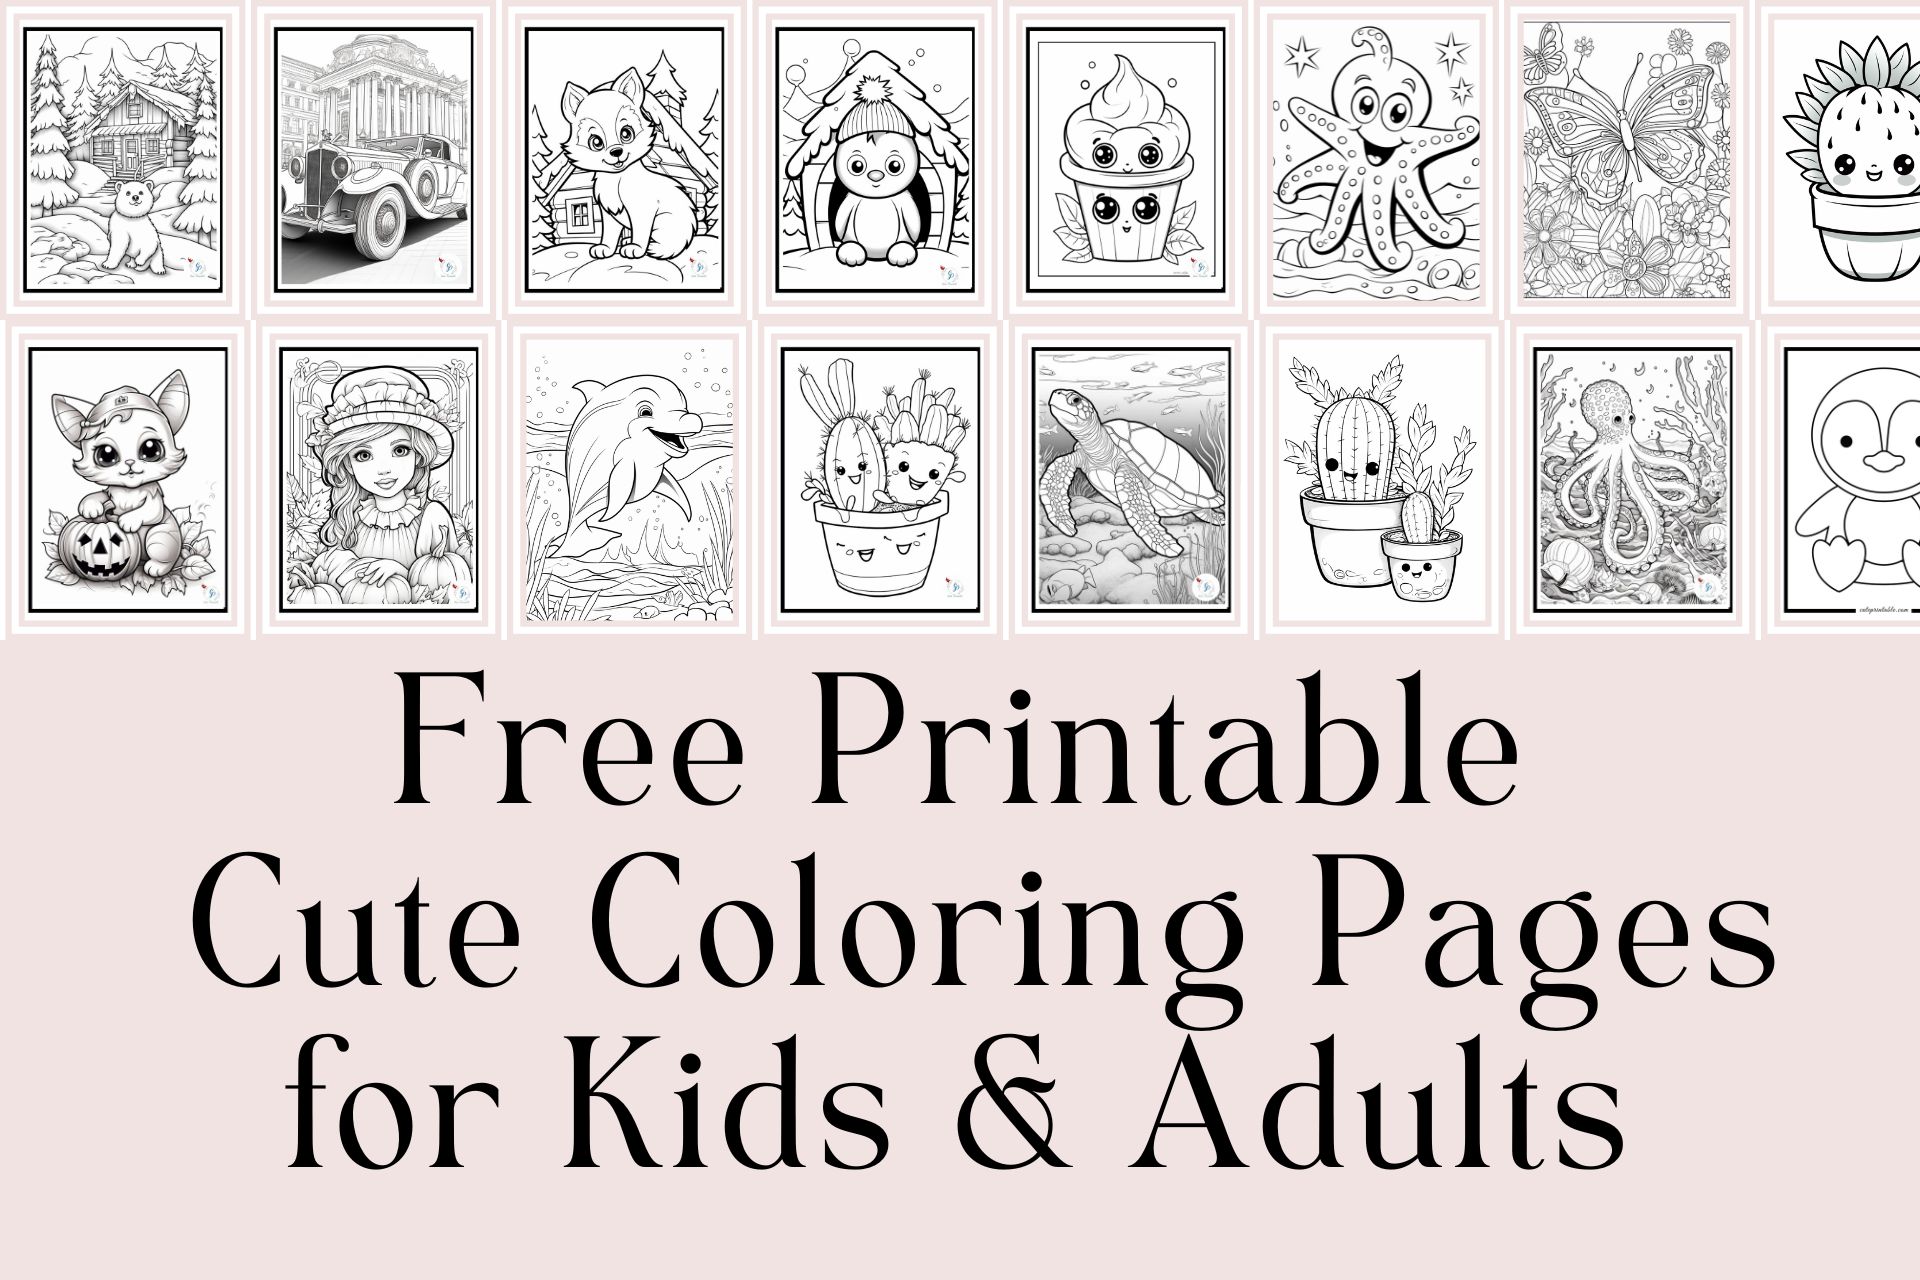 free coloring pages for kids and adults-cute printable homepage